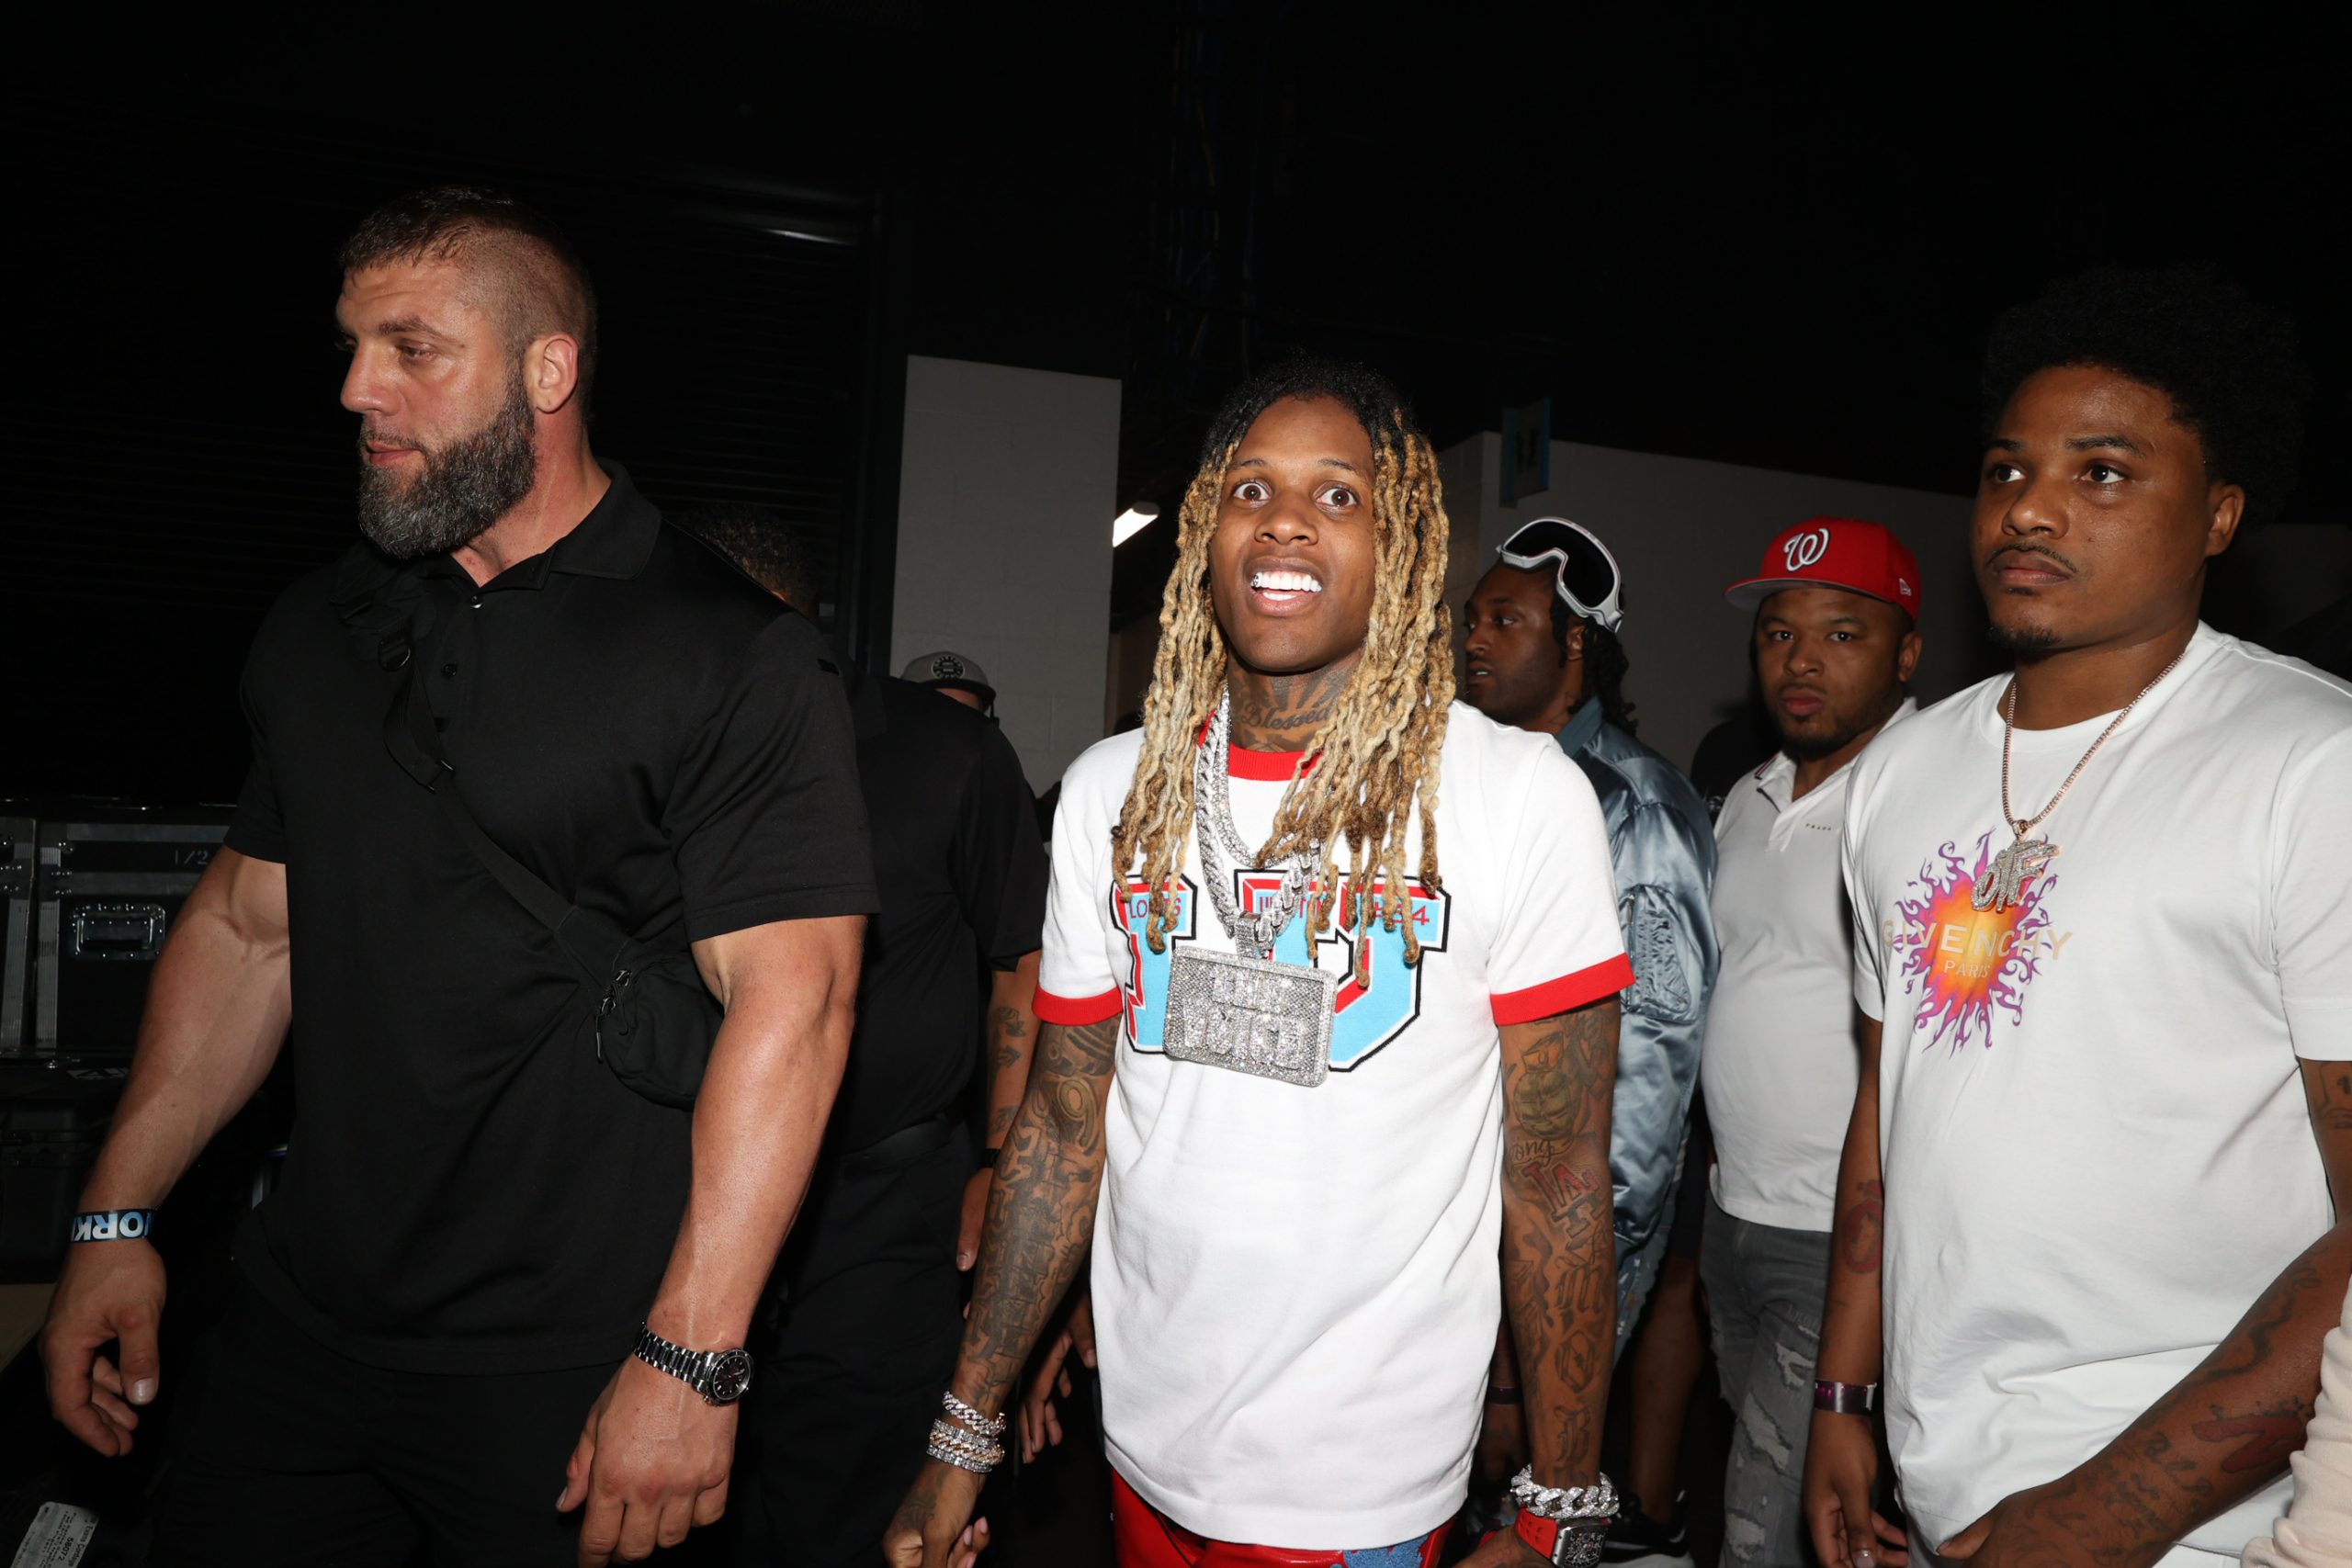 Yo Gotti hosts annual “Yo Gotti and Friends Birthday Bash” with Lil Uzi Vert, Lil Durk, Moneybagg Yo, JT of City Girls, Boosie Badazz and more at the FedEx Forum in Memphis with D’USSE Cognac